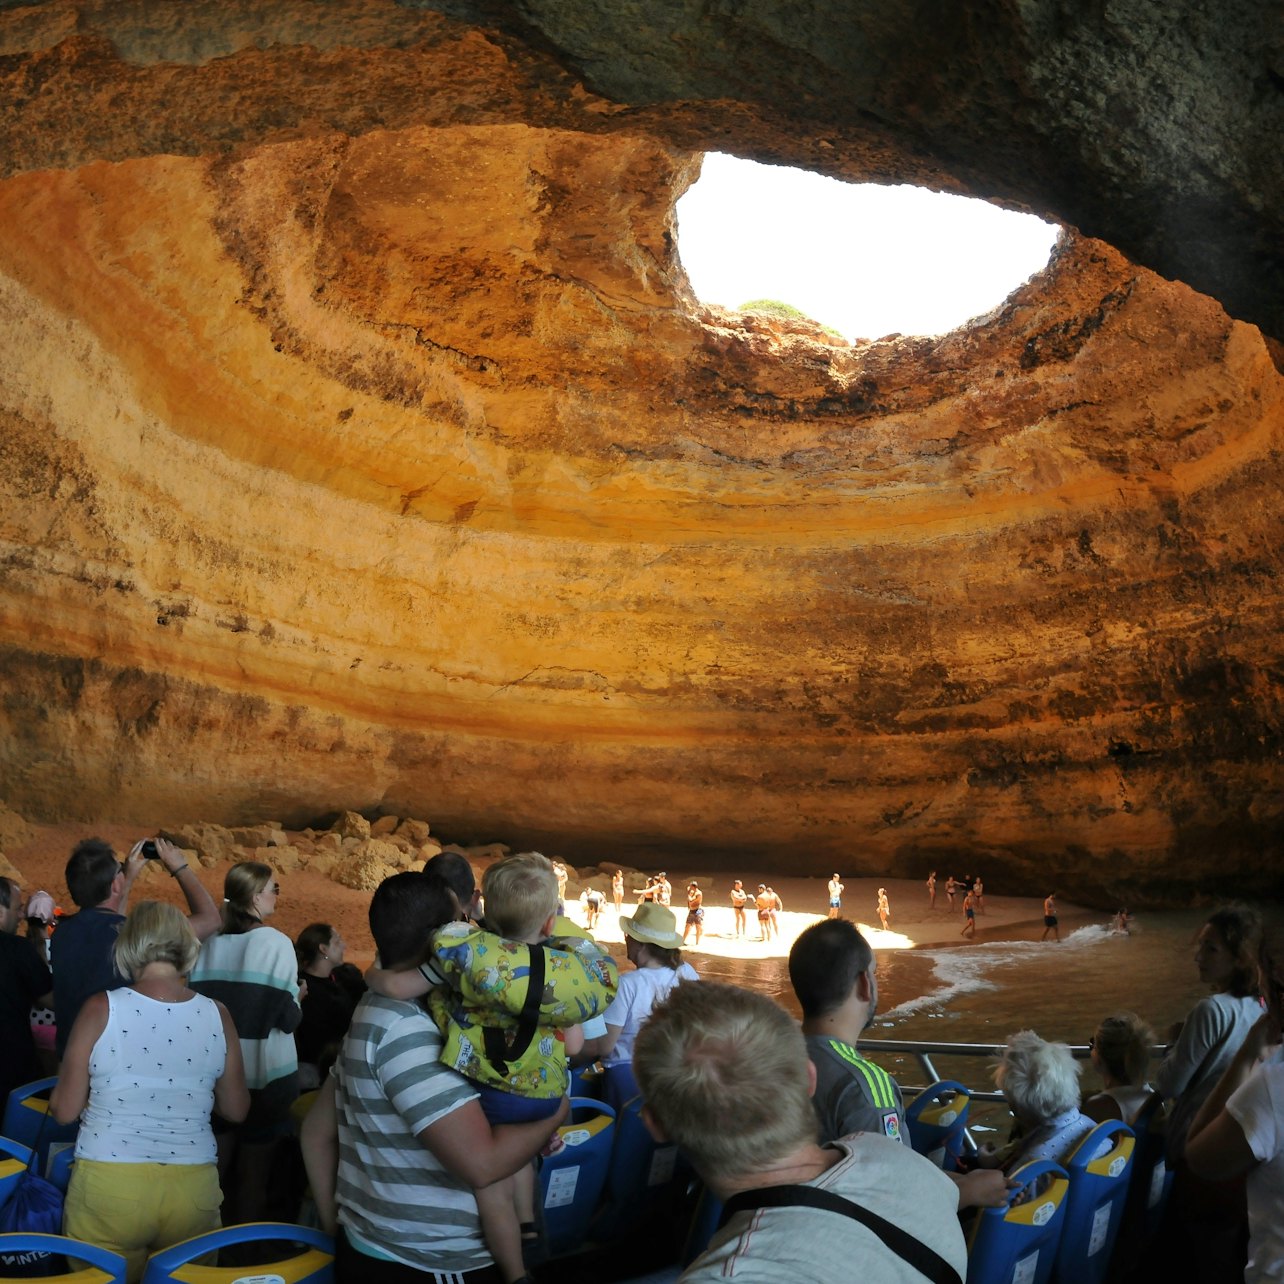 Caves and Dolphin Watching Cruise from Albufeira - Dreamer (Jet Boat) - Accommodations in Albufeira